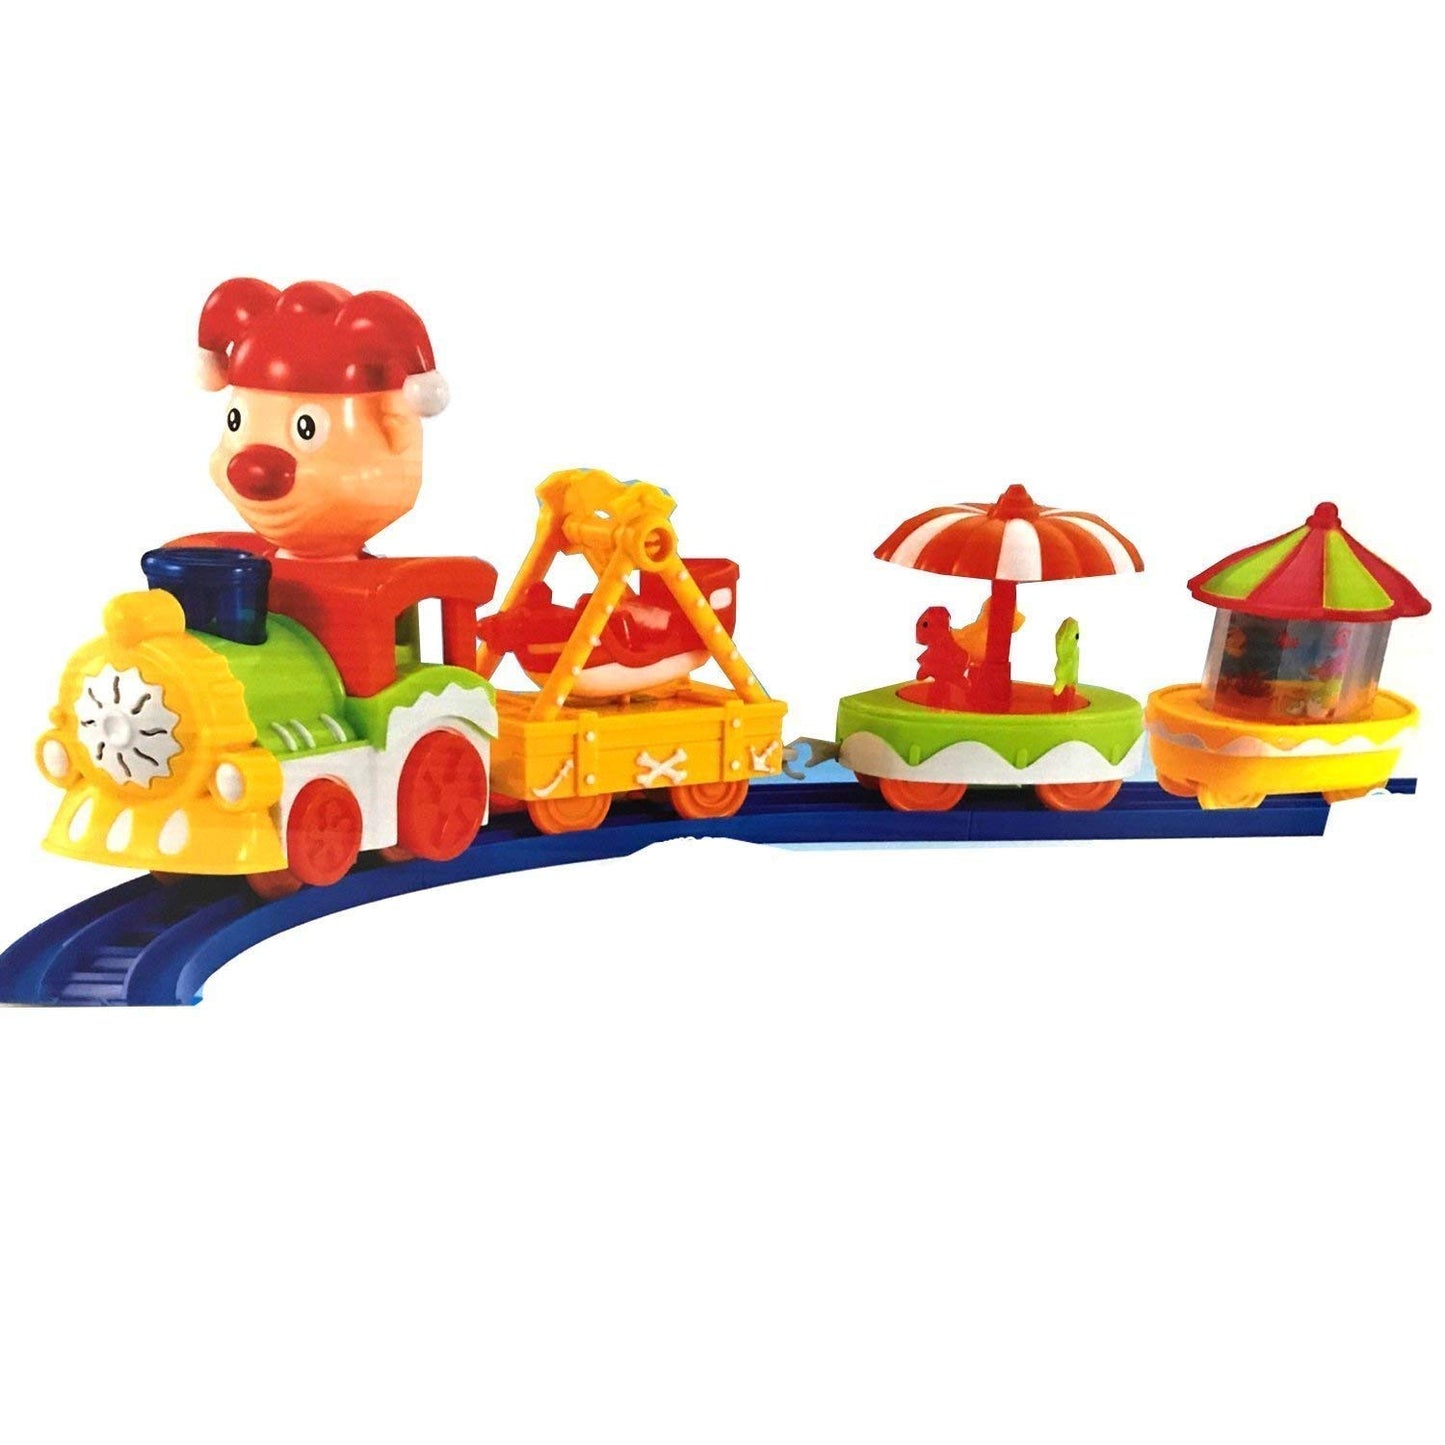 Happy Circus Electric Train | Customize Your Own Track | Cartoon Themed Train Track